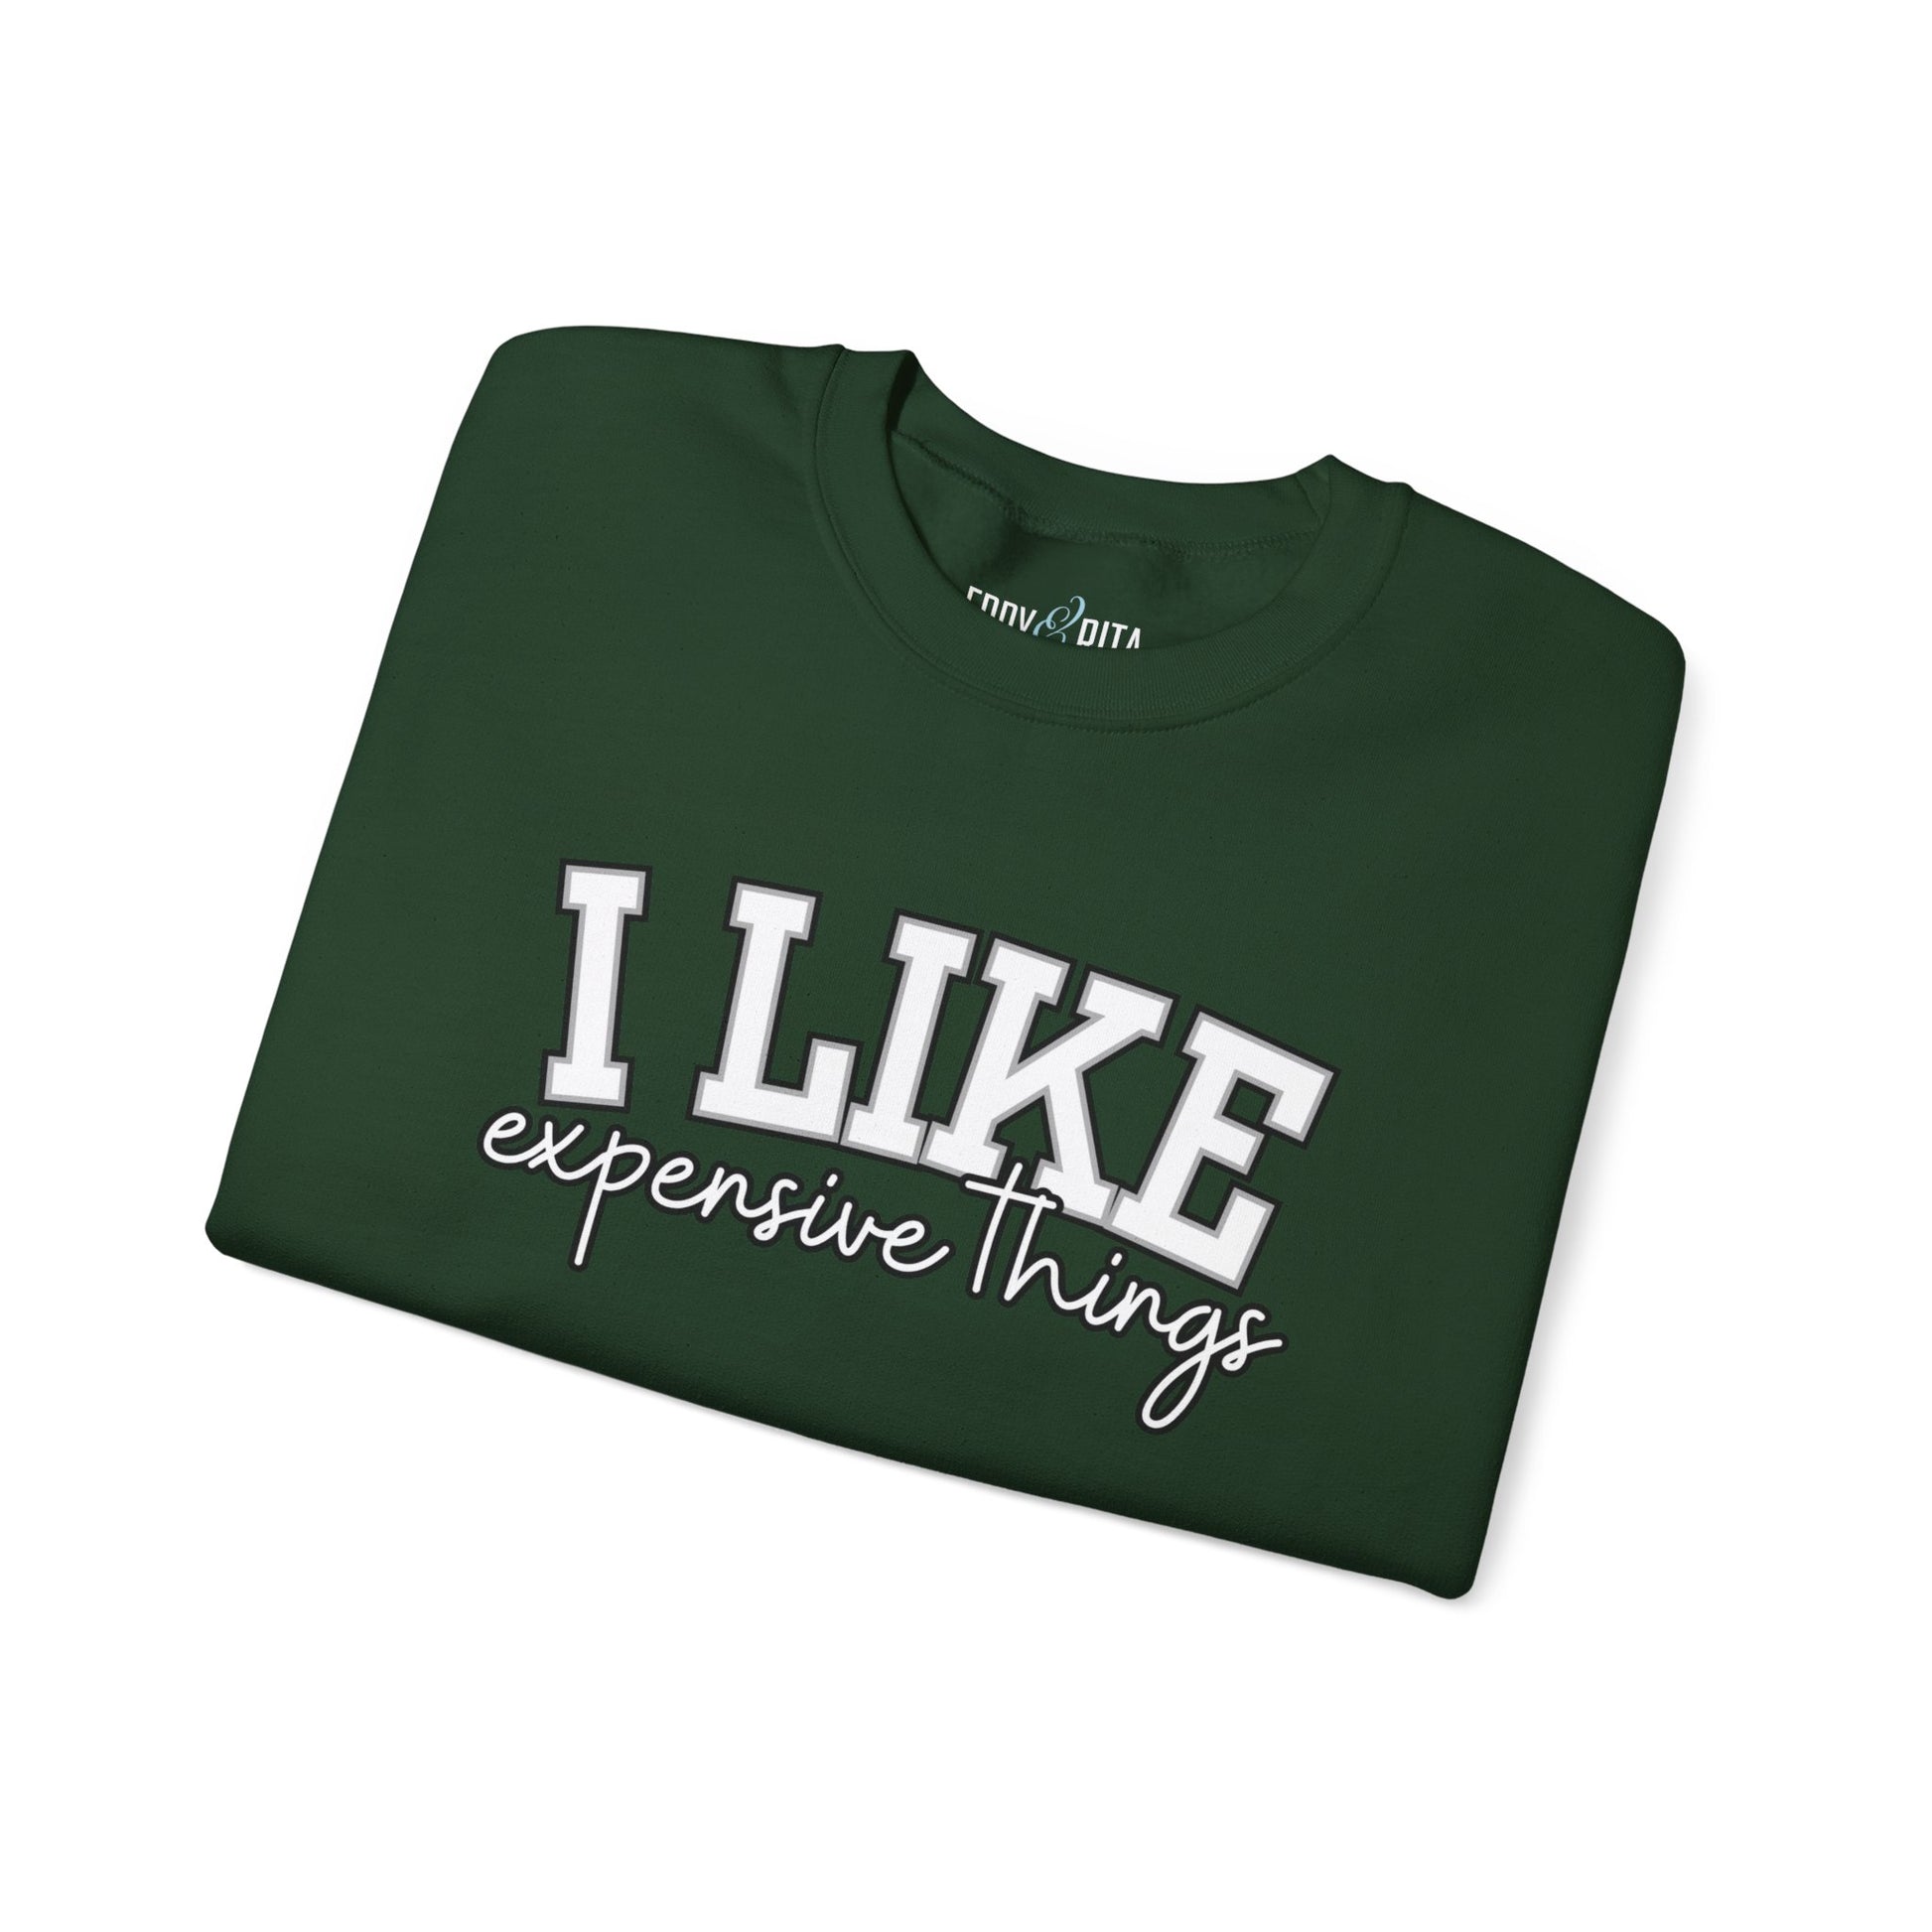 Women's Sweatshirt - 'I Like Expensive Things' - Luxe Comfort and Chic Style for Fashion-Forward Elegance - Eddy and Rita